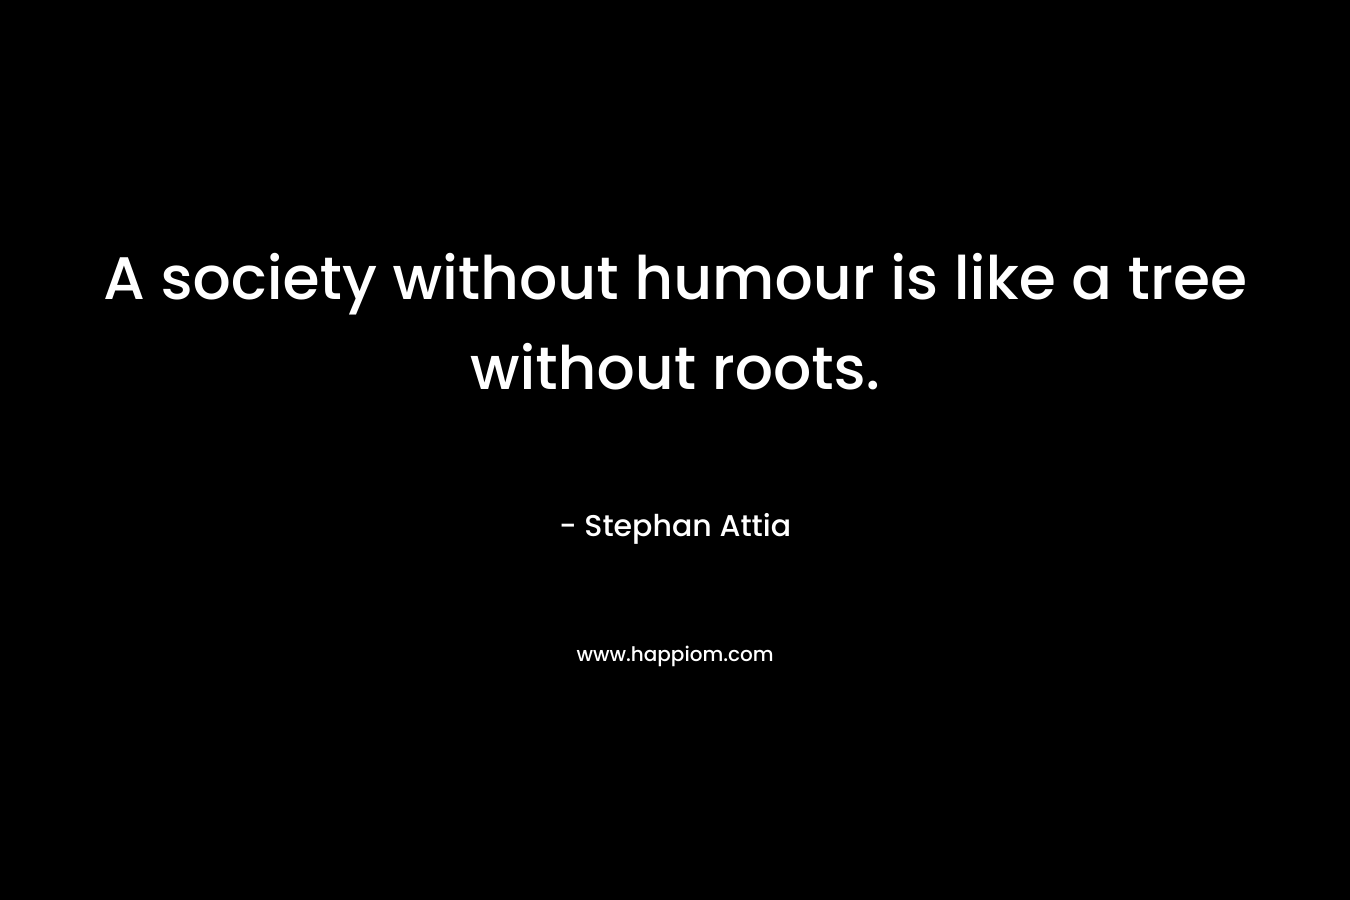 A society without humour is like a tree without roots. – Stephan Attia